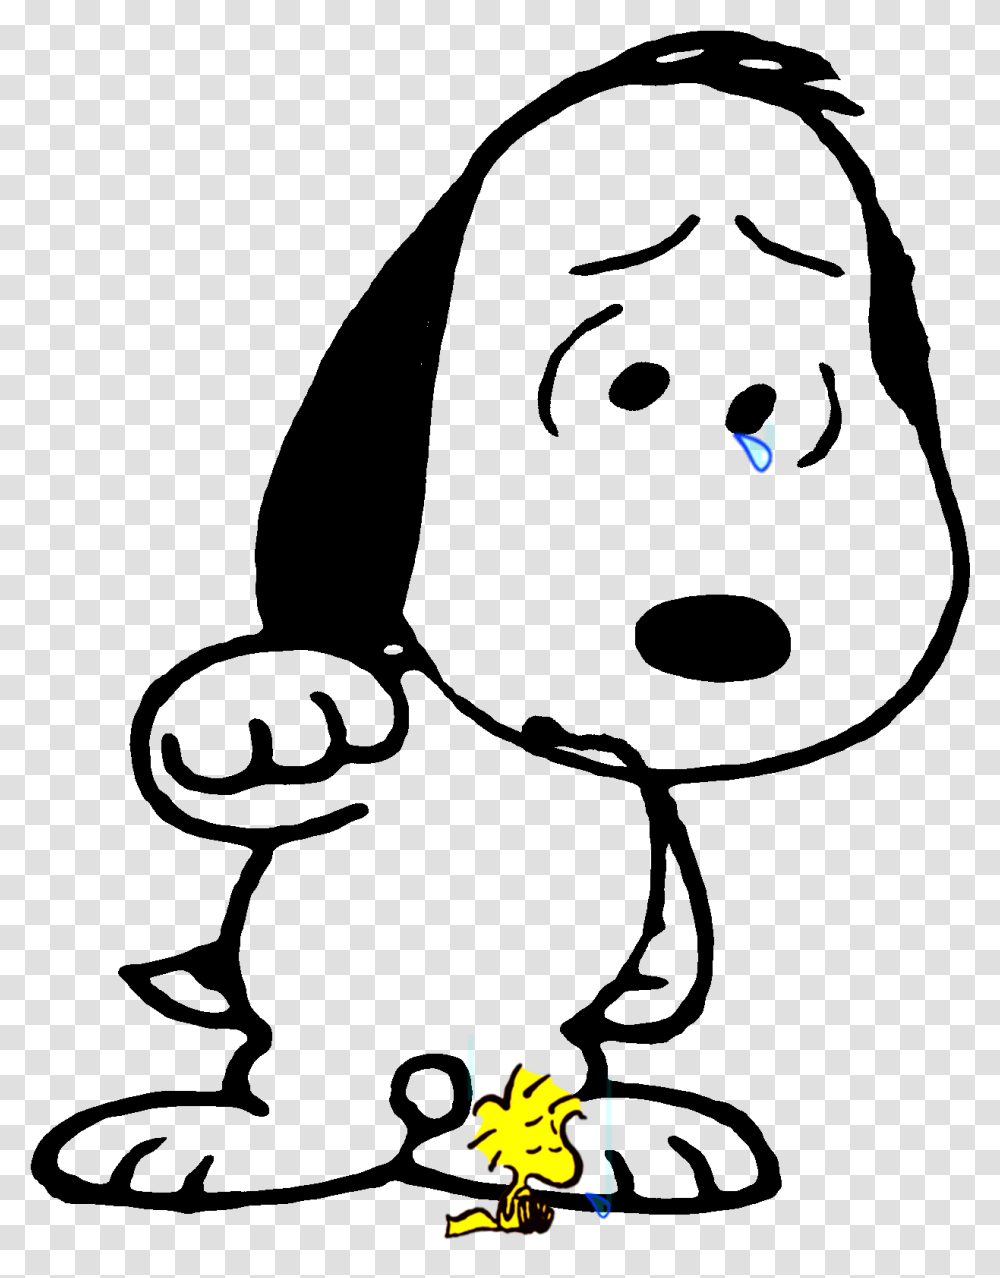 Woodstock Download Snoopy Triste, Quake, Pac Man Transparent Png